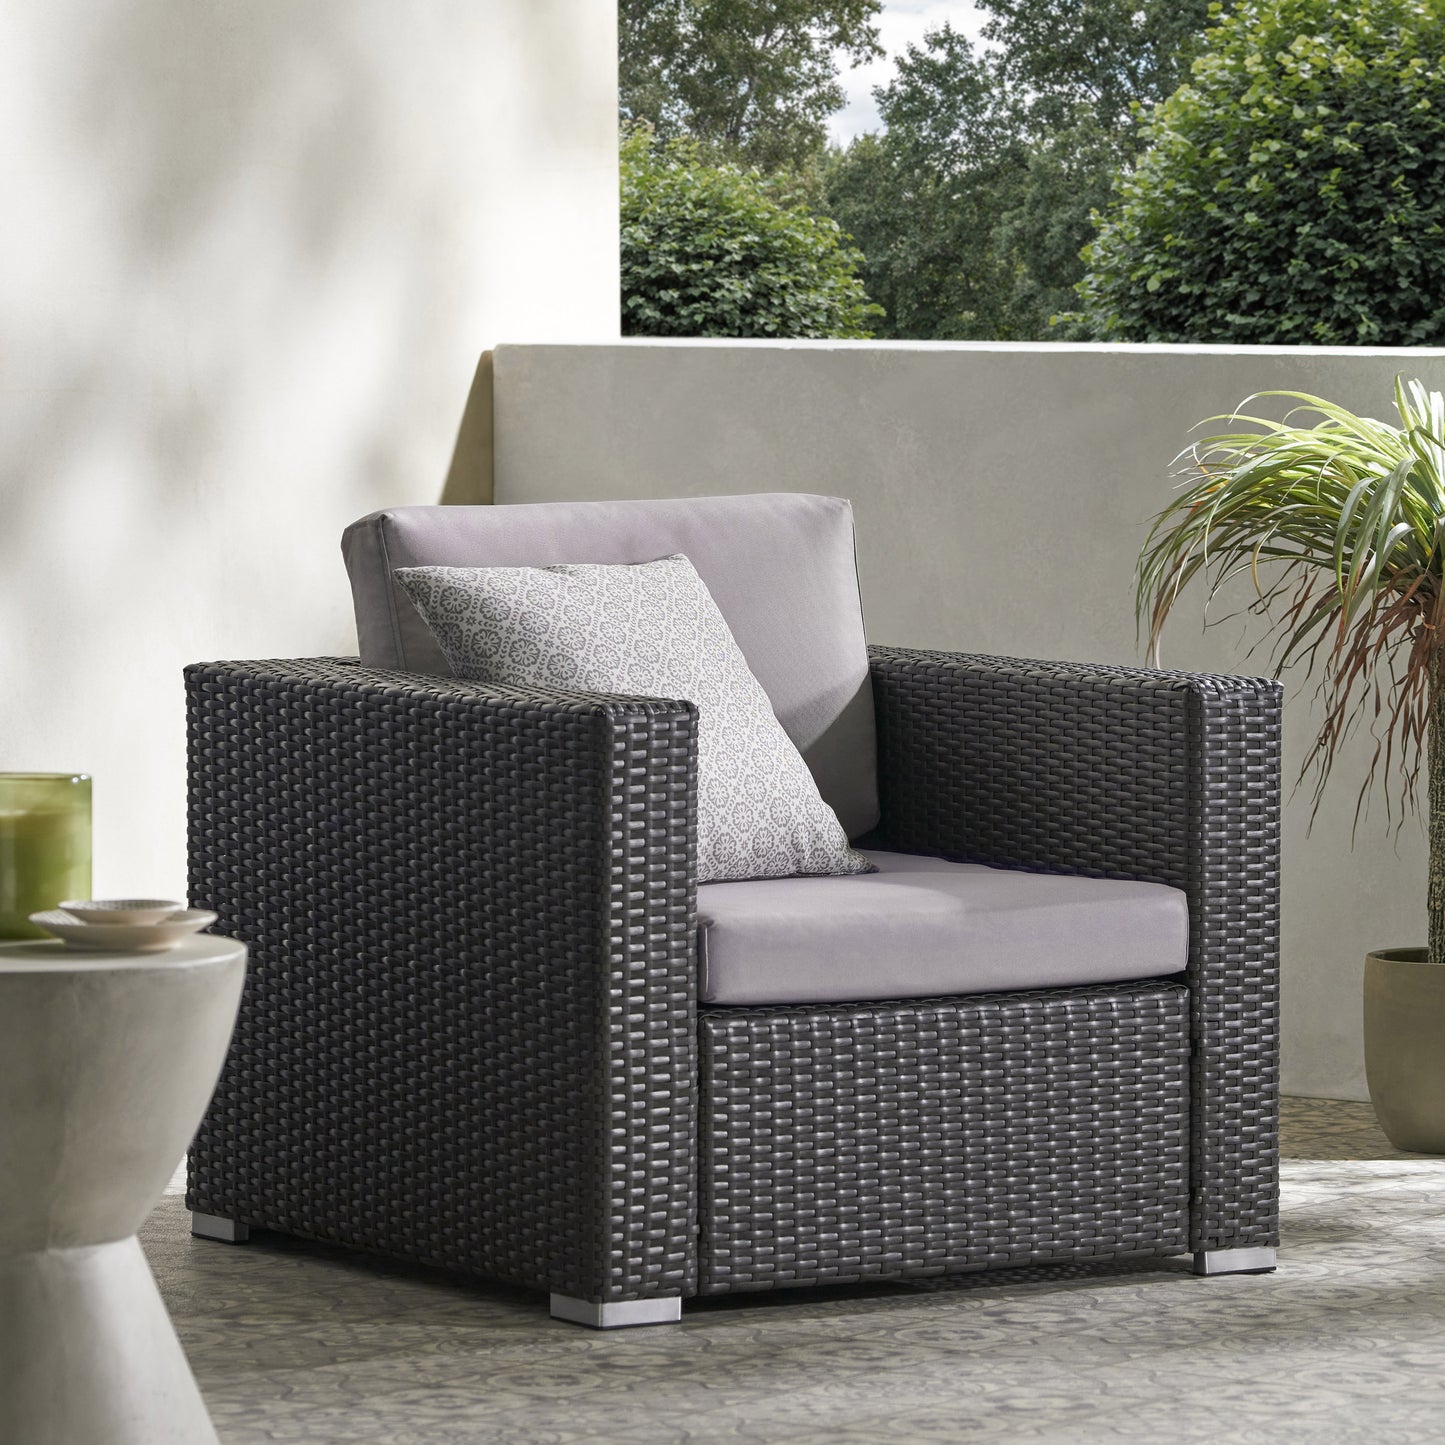 Avianna Outdoor Wicker Club Chair with Cushions